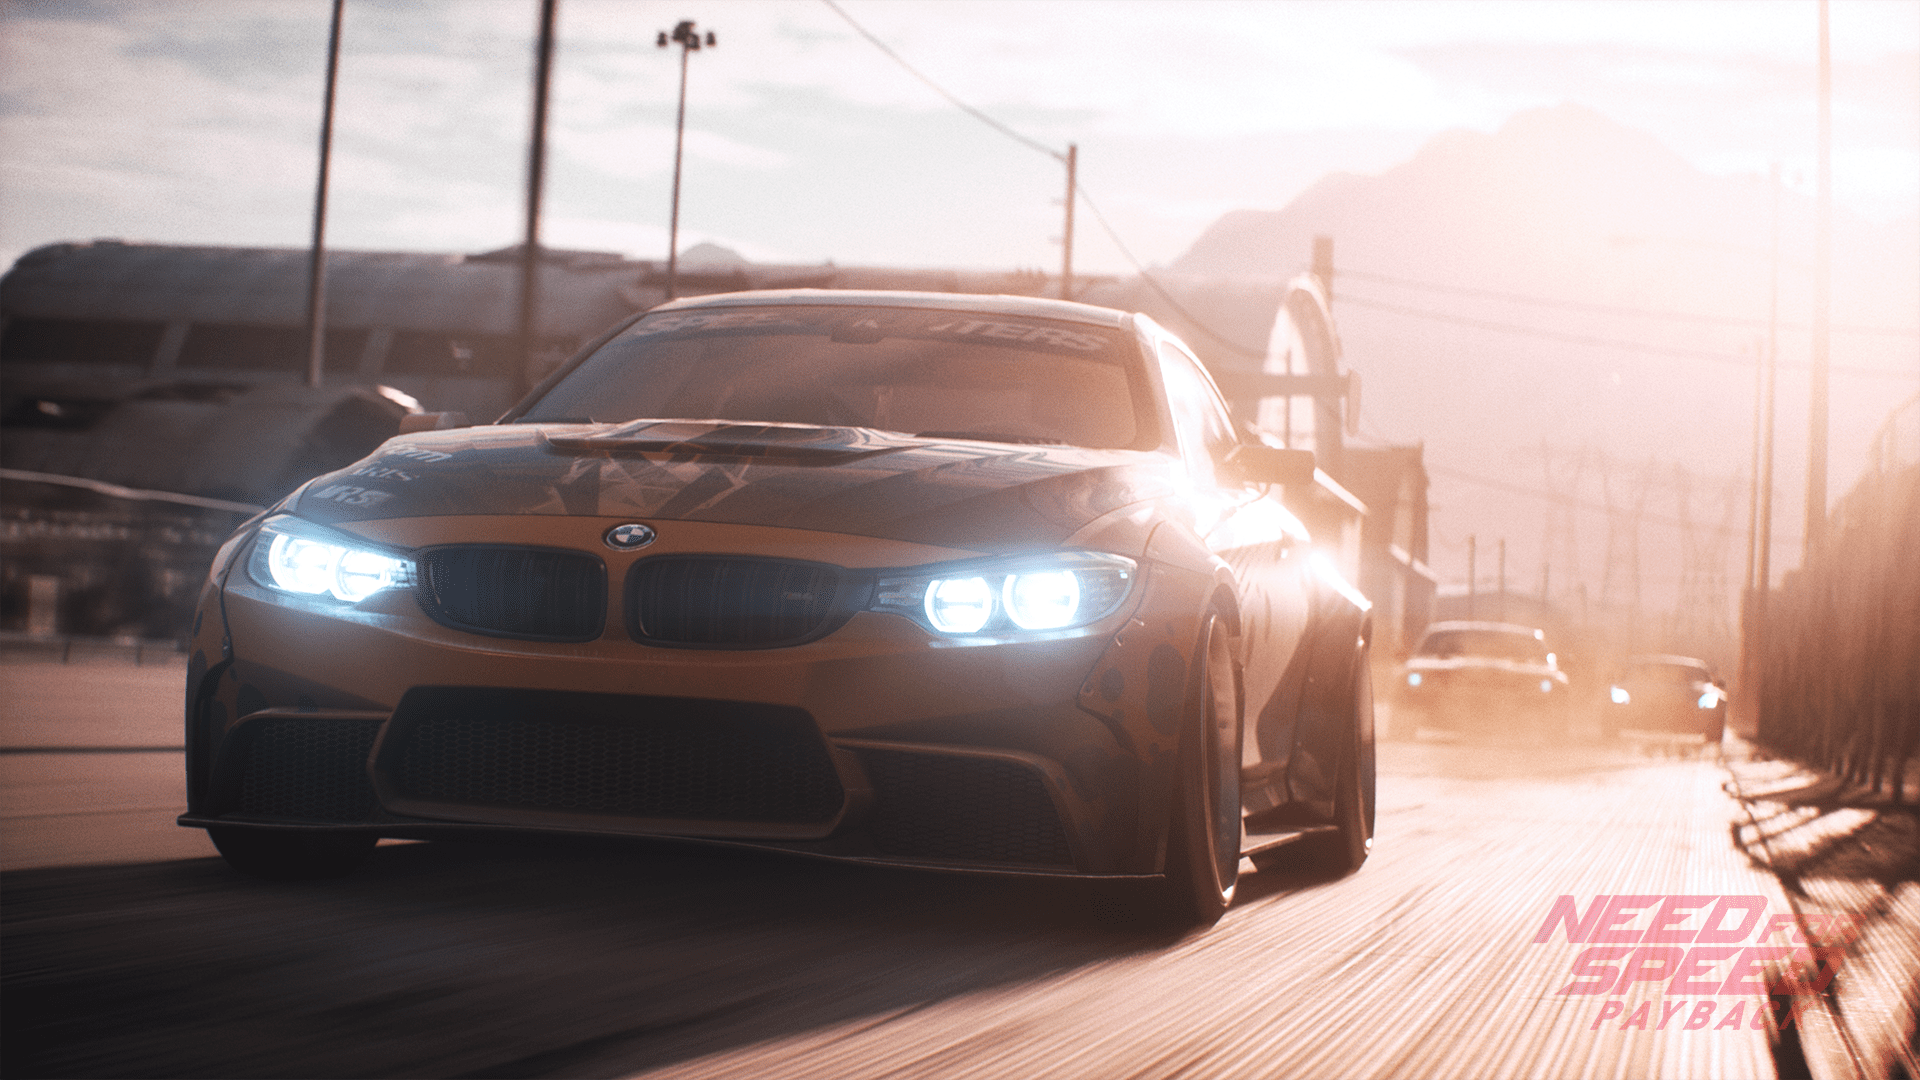 Need for Speed Payback_Car Chase_1080p_wm